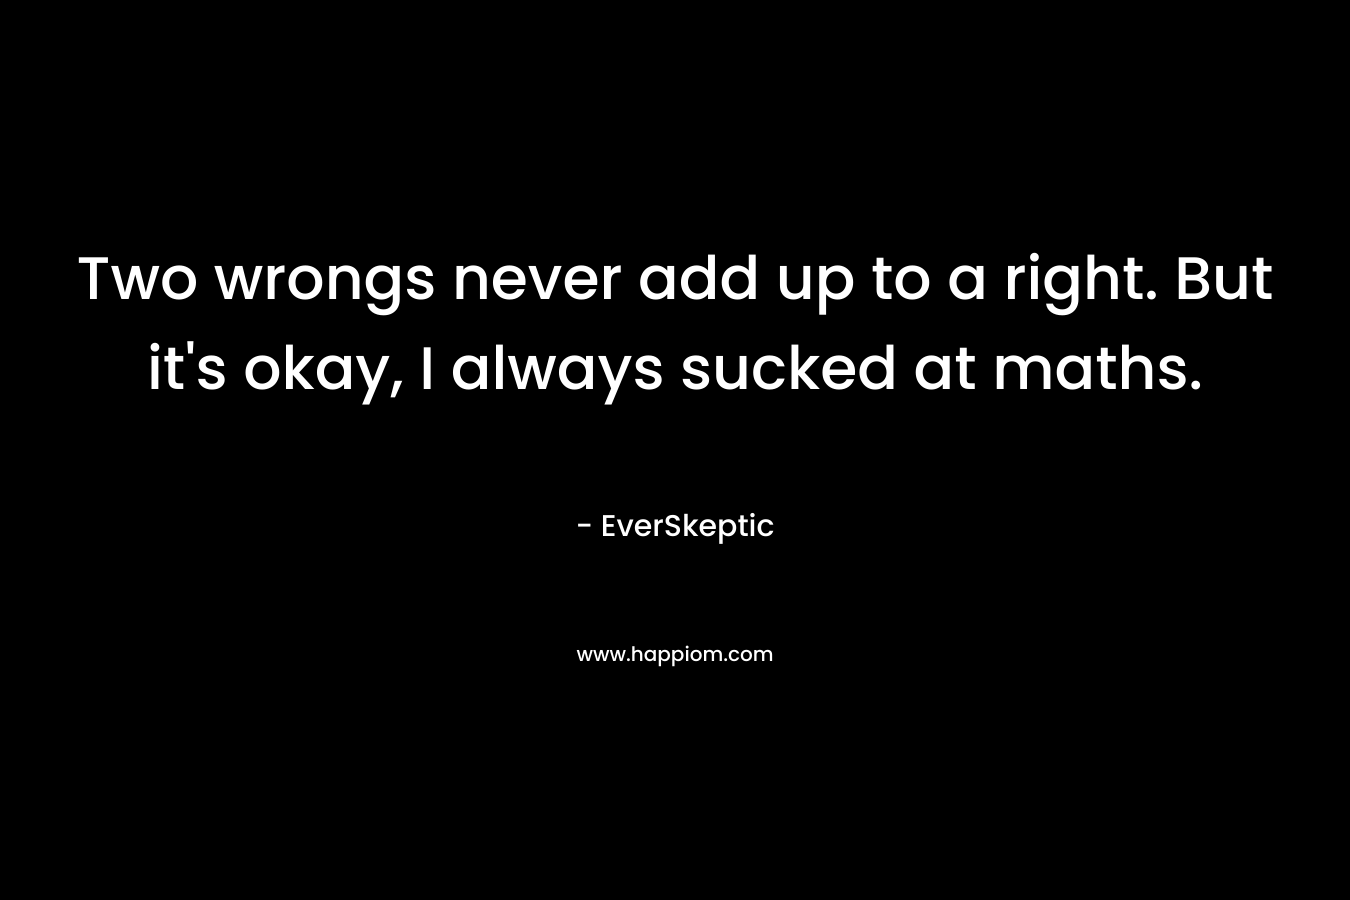 Two wrongs never add up to a right. But it's okay, I always sucked at maths.